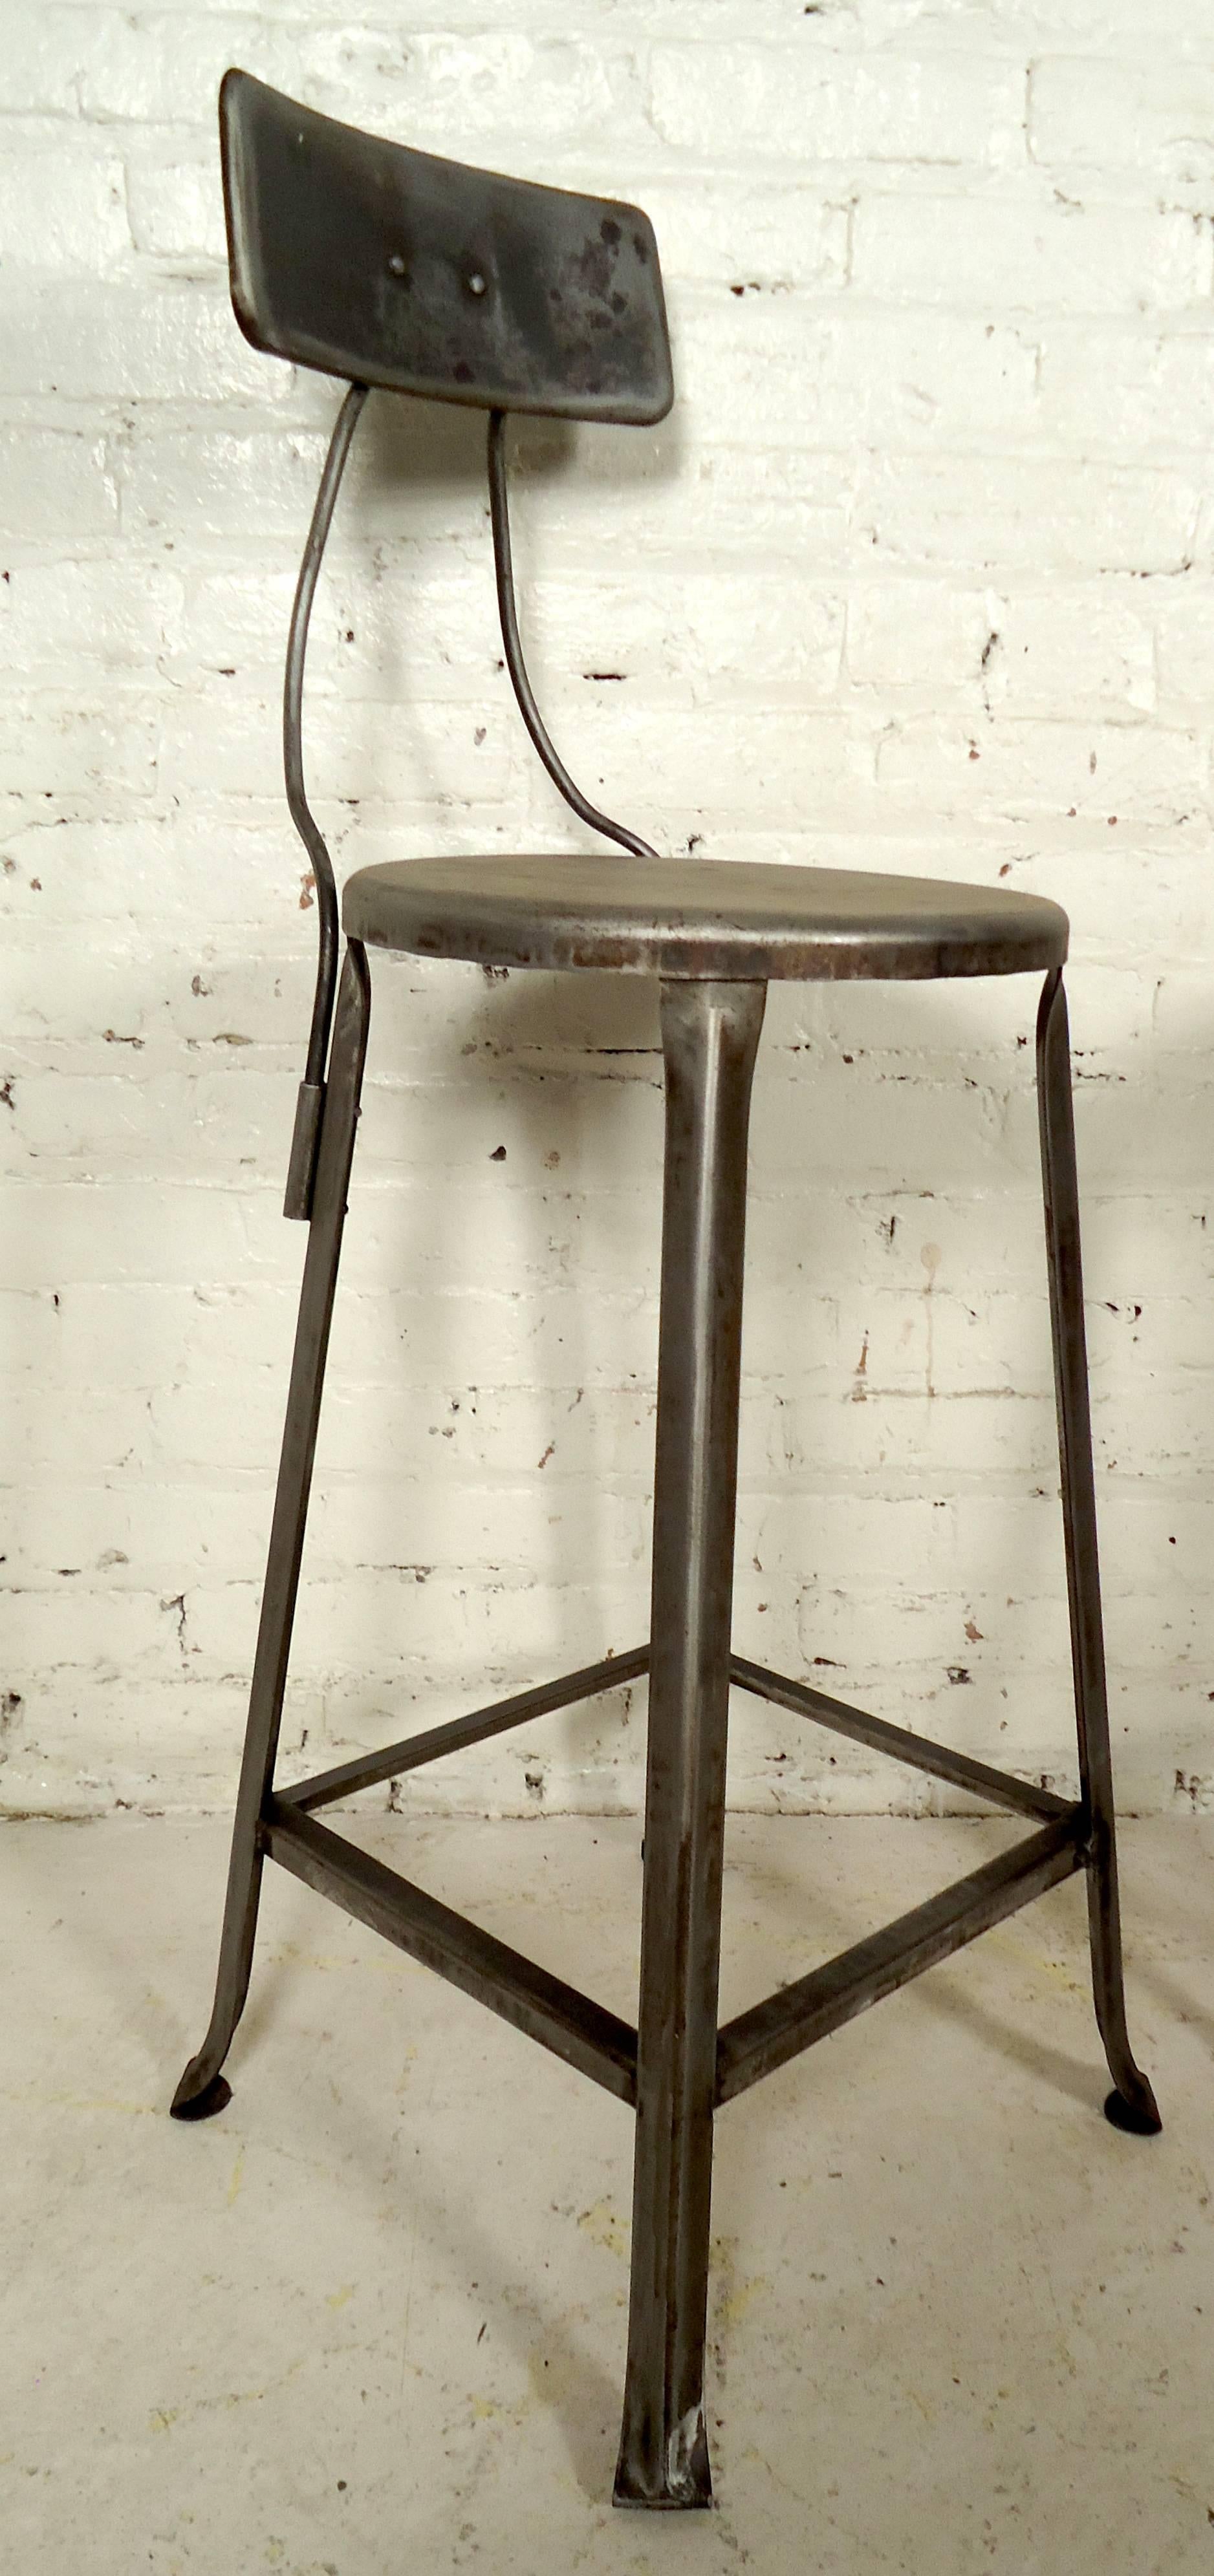 Two vintage industrial Toledo style stools featuring sturdy base and beautiful bent iron backrest.

Please confirm item location NY or NJ with dealer.